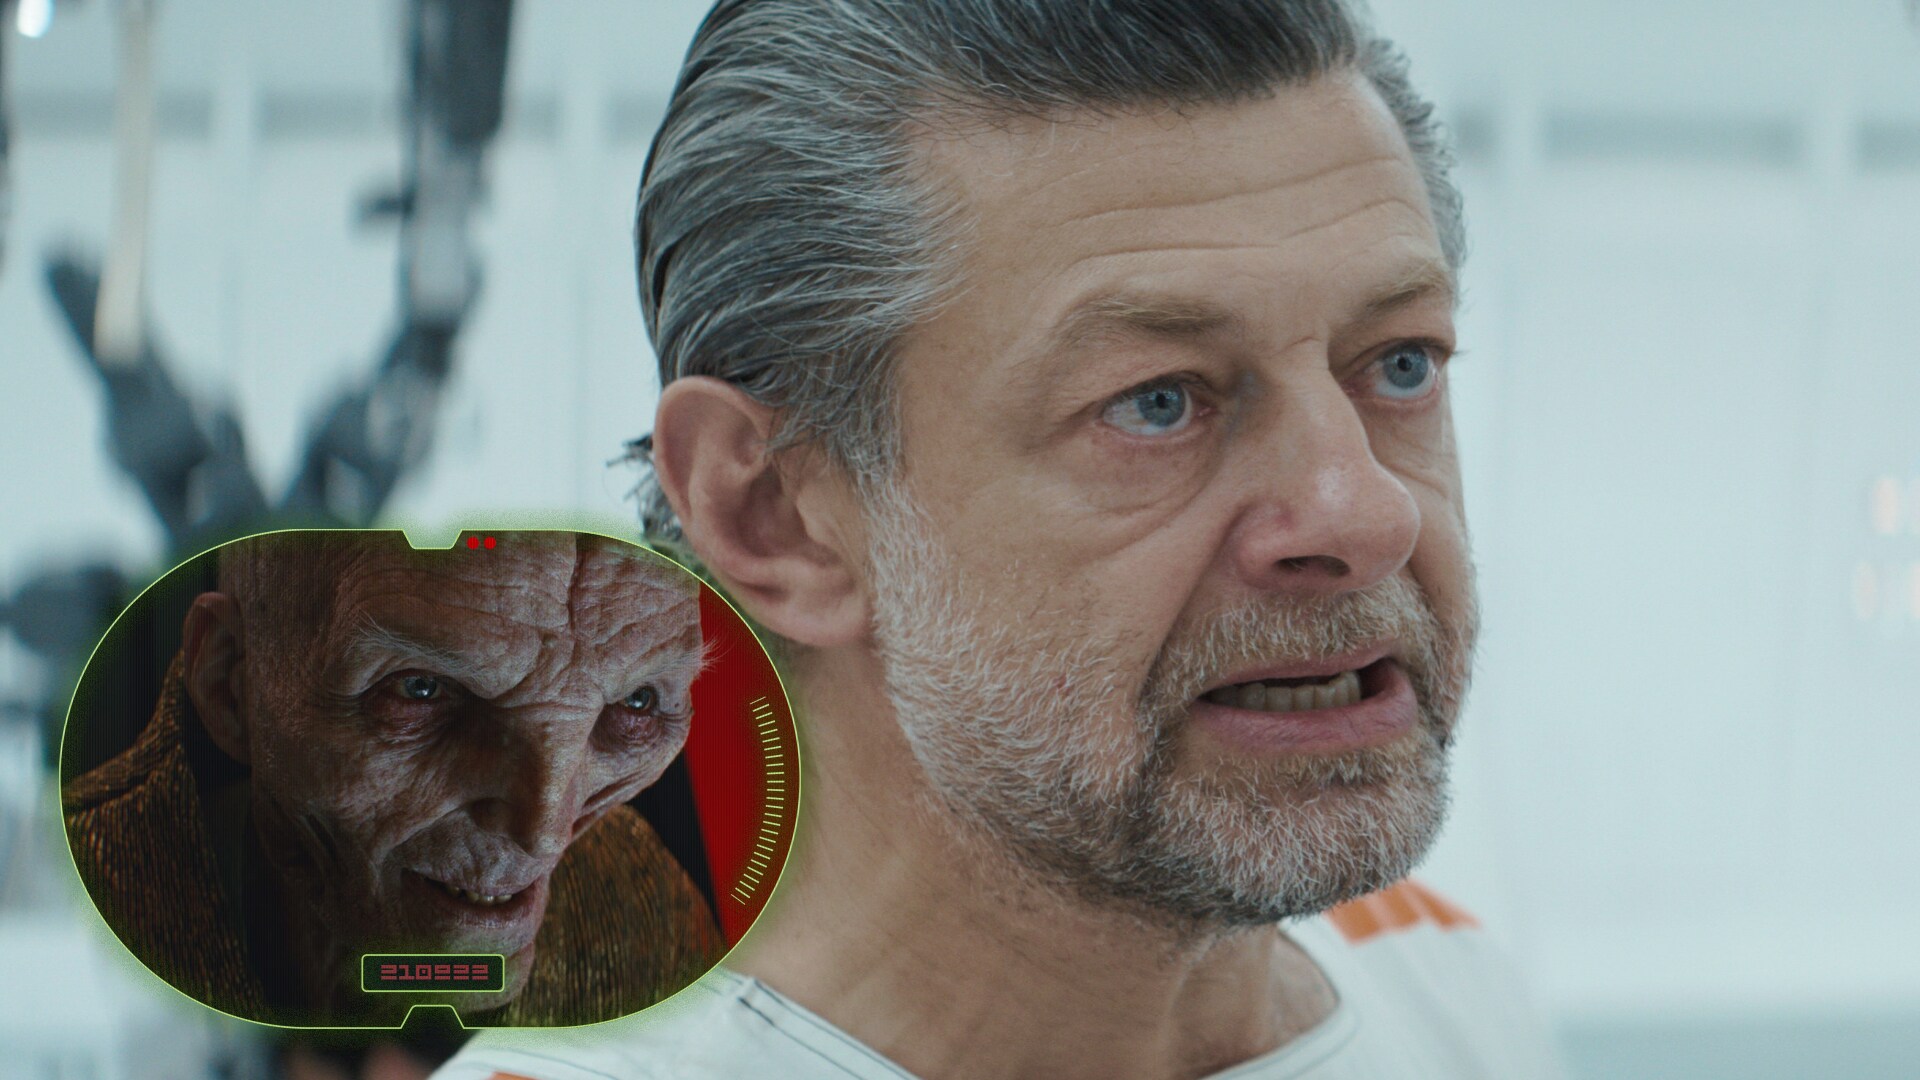 The role of Kino Loy is played by Andy Serkis, who returns to Star Wars -- but now visible in liv...